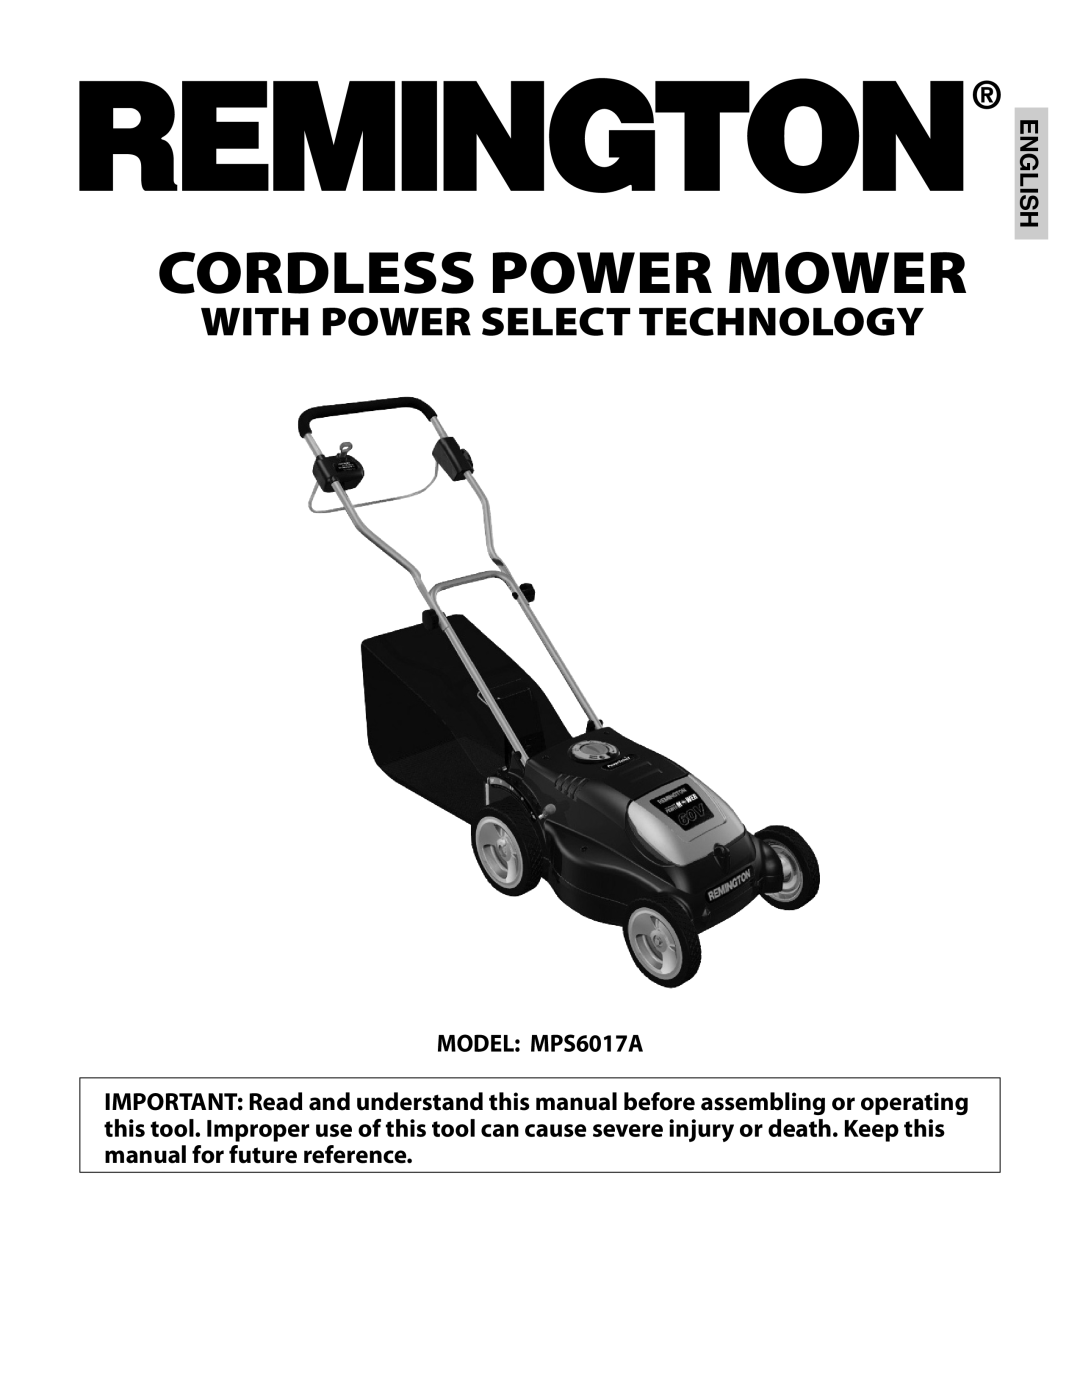 Remington Power Tools manual English, MODEL MPS6017A, Cordless Power Mower, With Power Select Technology 